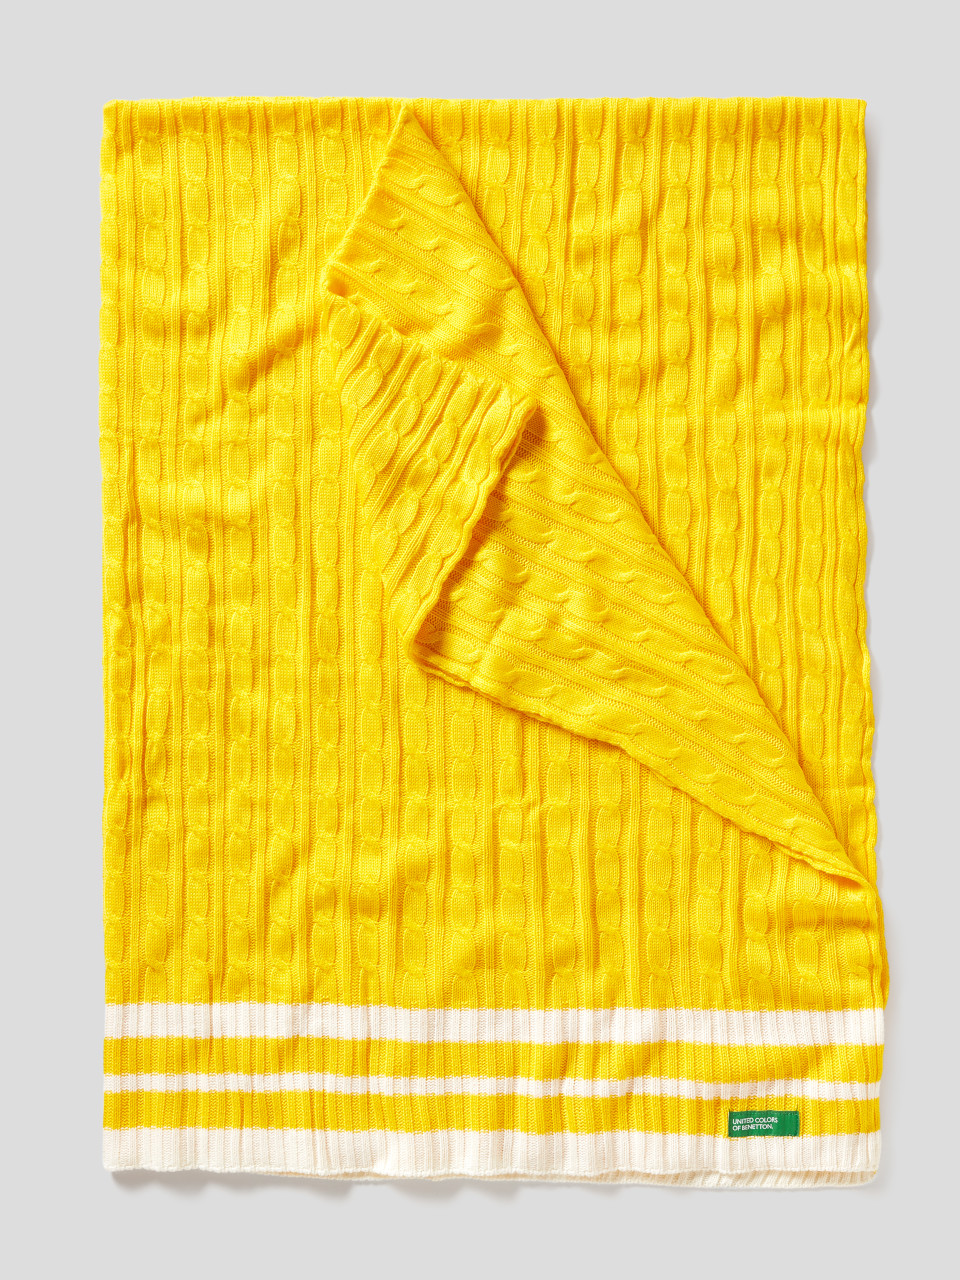 Benetton, Cable Knit Cover, Yellow, Benetton Home